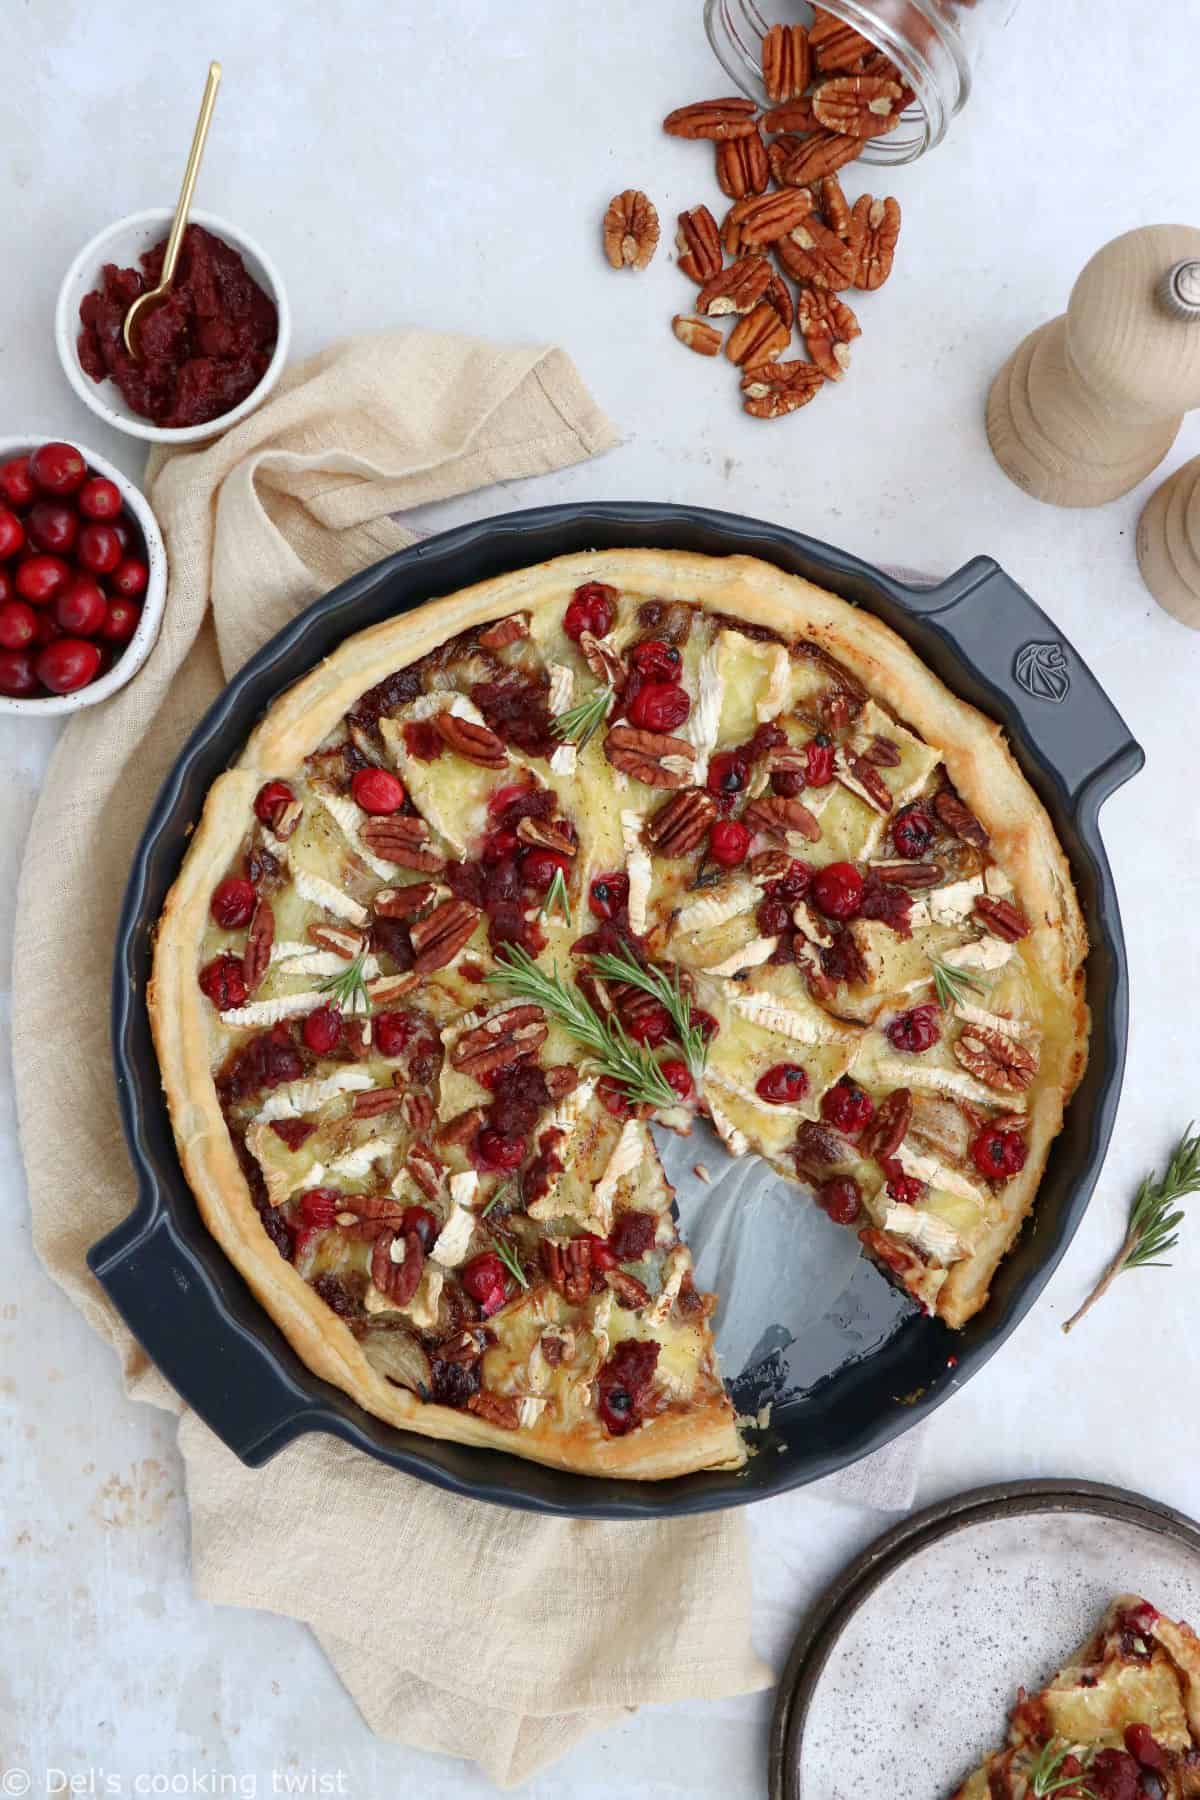 This creamy mushroom pasta bake is a cozy vegetarian comforting casserole, just perfect for a cozy weeknight dinner.This cranberry brie tart prepared with a puff pastry makes for a lovely festive starter for the holidays. It's warm, comforting, and loaded with melting cheese and tangy cranberries.